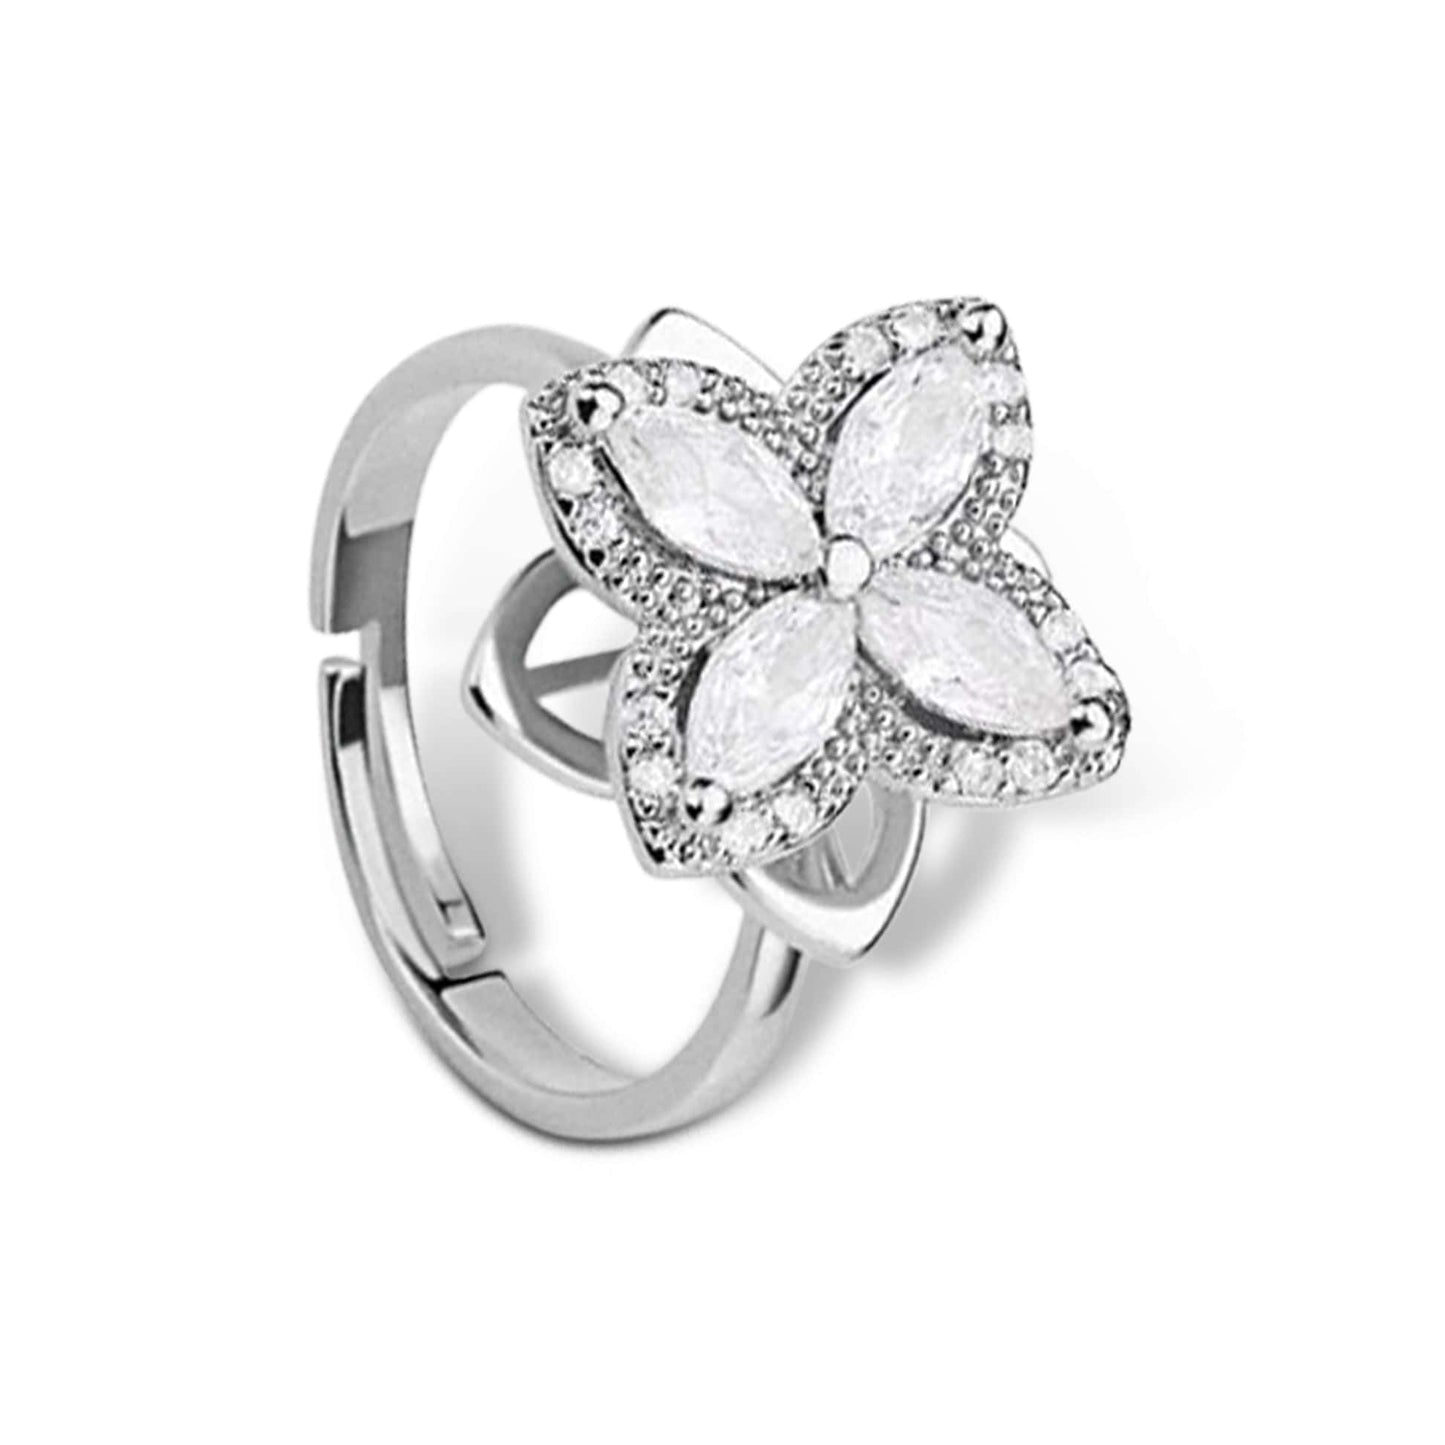 Gold Plated The Present Collection - Daisy Cz Gem Fidget Spinner Ring